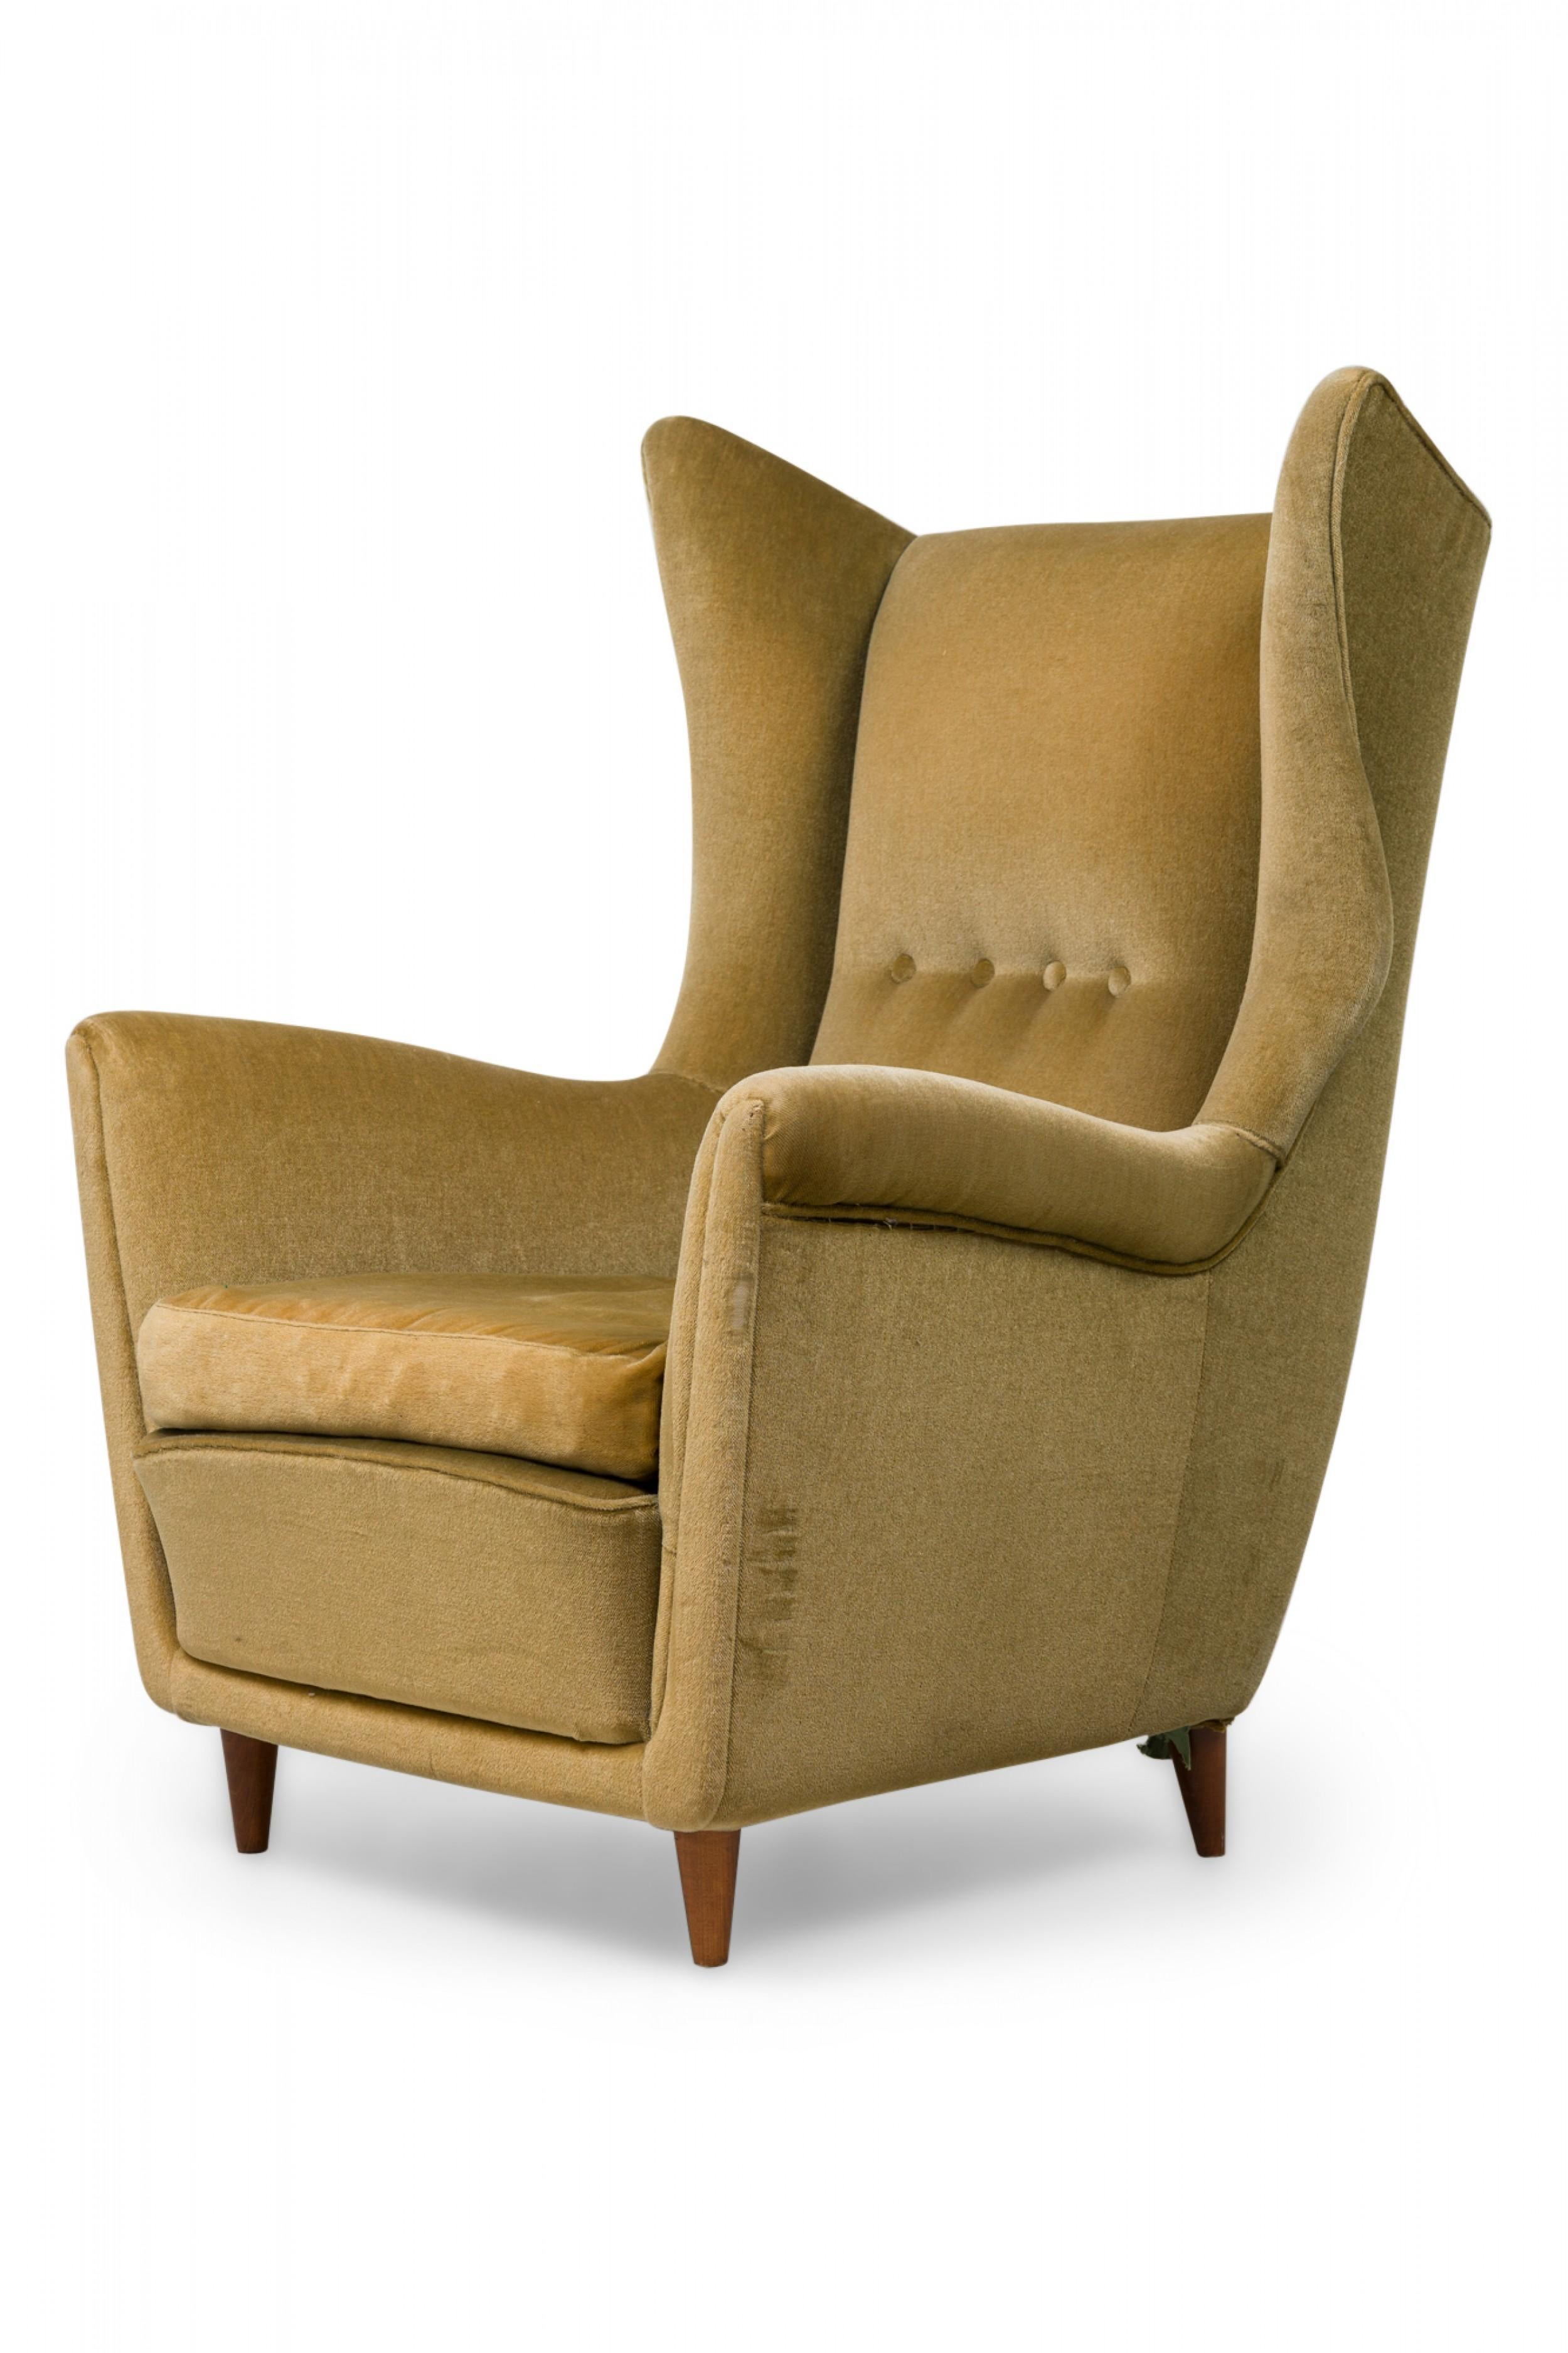 Pair of Midcentury Italian Modern Gold Velvet Upholstered Lounge / Armchairs In Good Condition For Sale In New York, NY